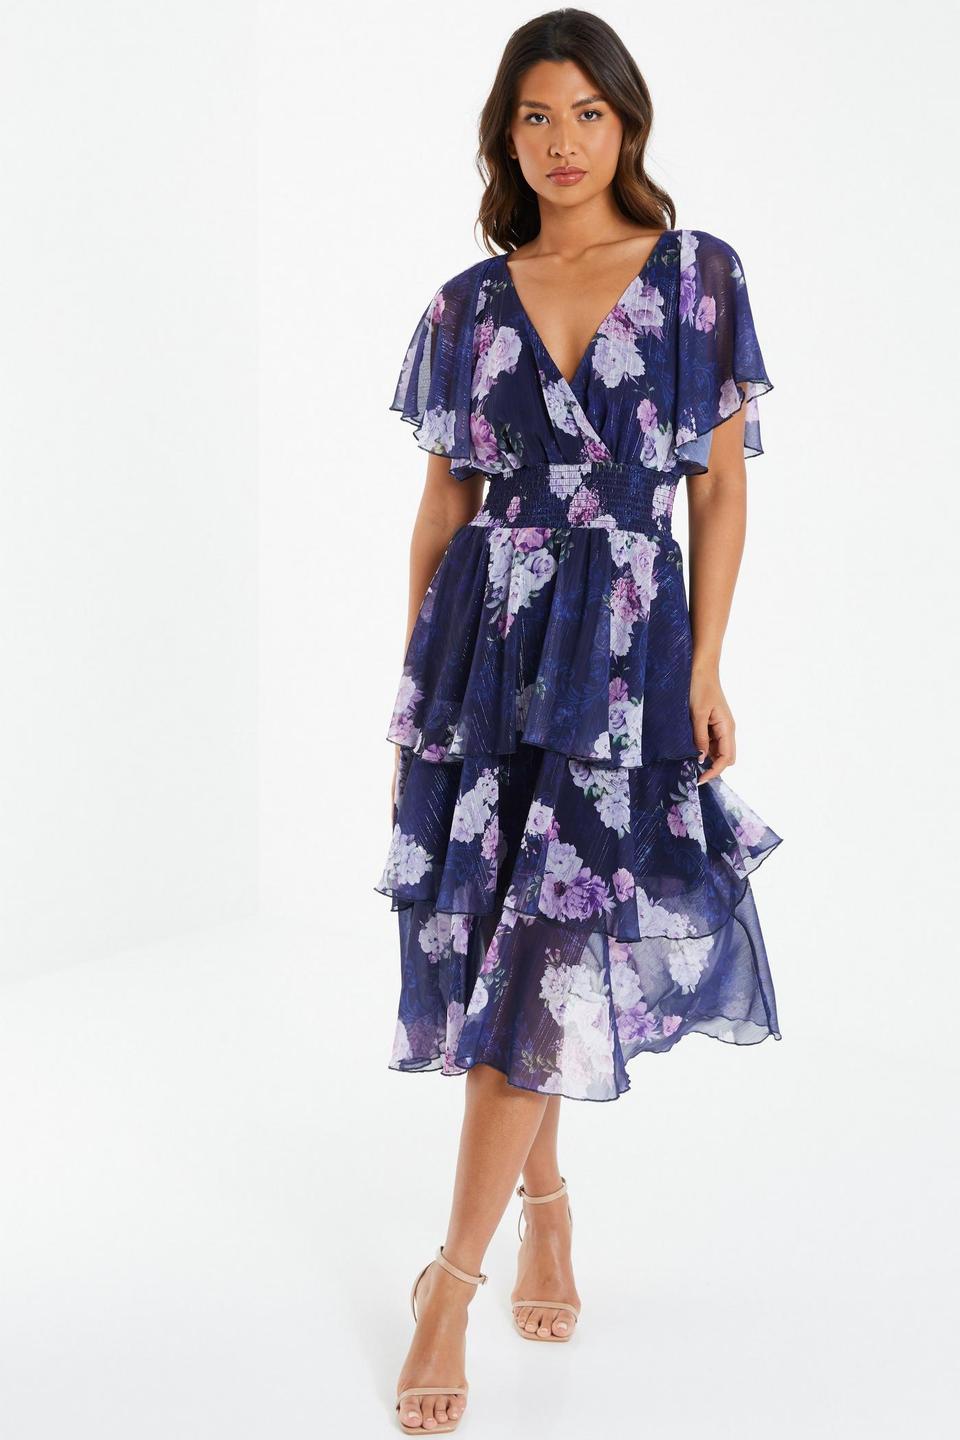 Floral Bridesmaid Dresses: 40 Looks Your Maids Will Adore - hitched.co ...